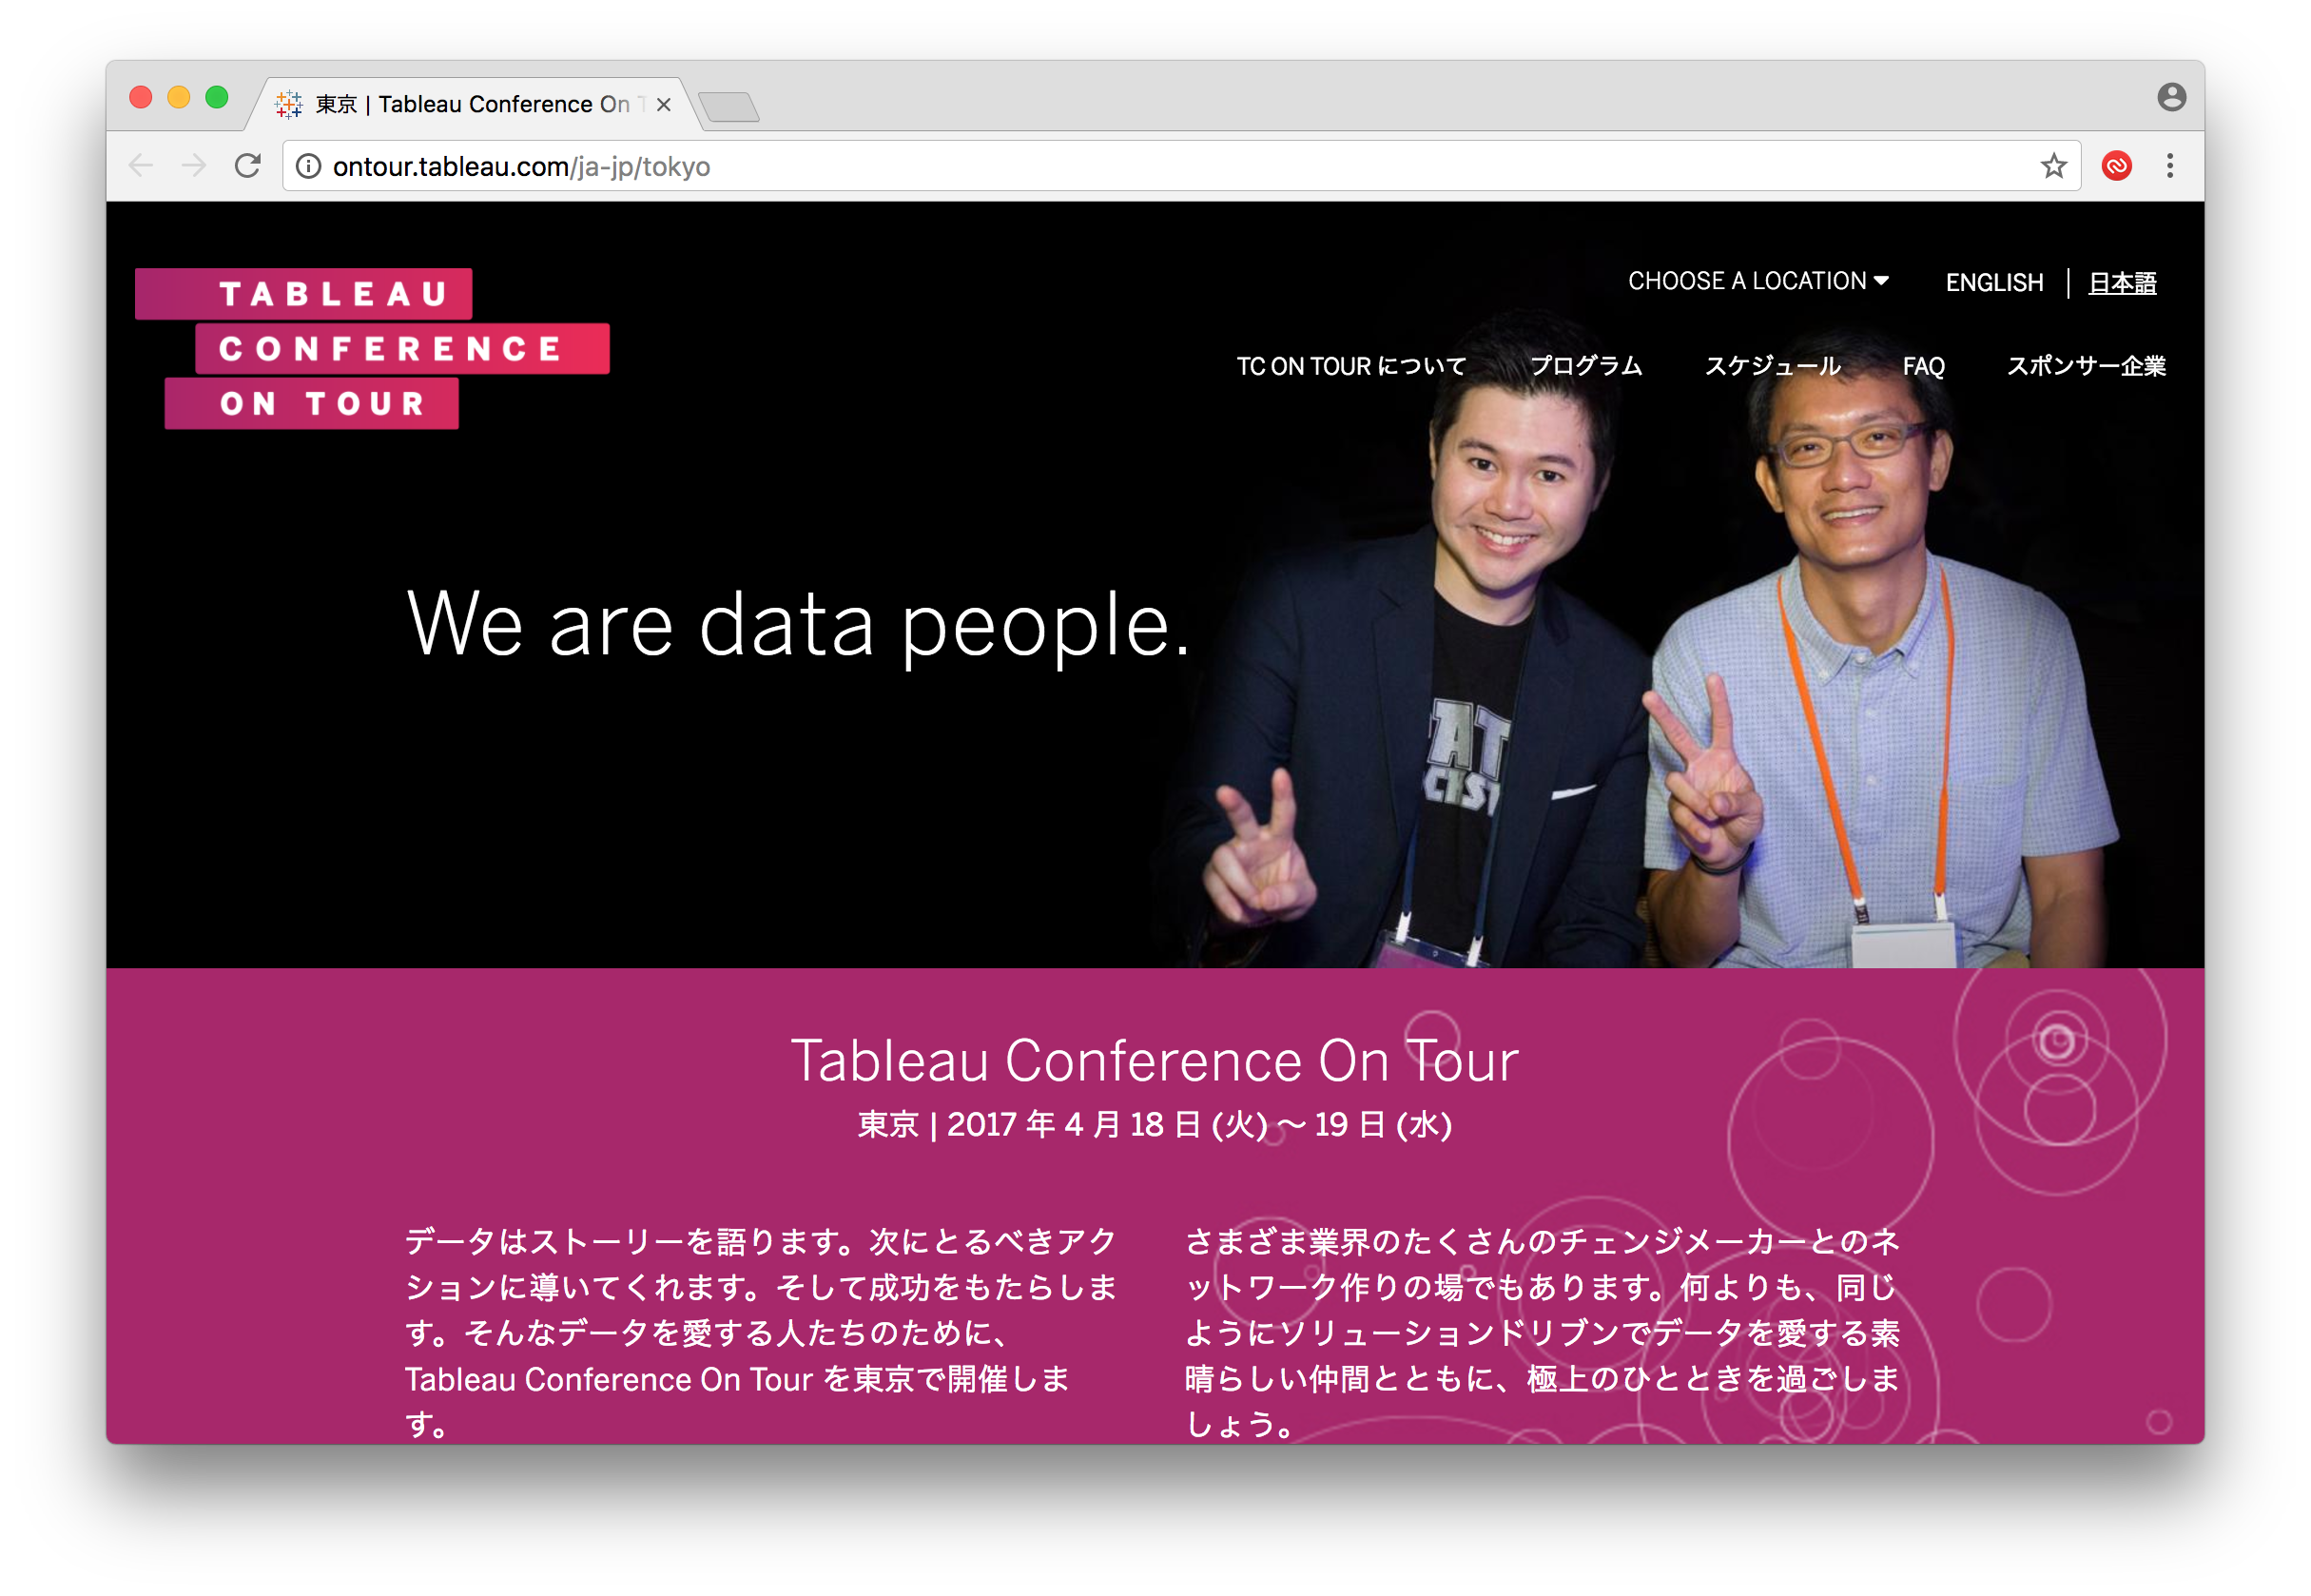 Tableau Data17 レポート 高度なマークタイプ 棒と線を超えて Tableau Conference On Tour 17 Tokyo Developersio